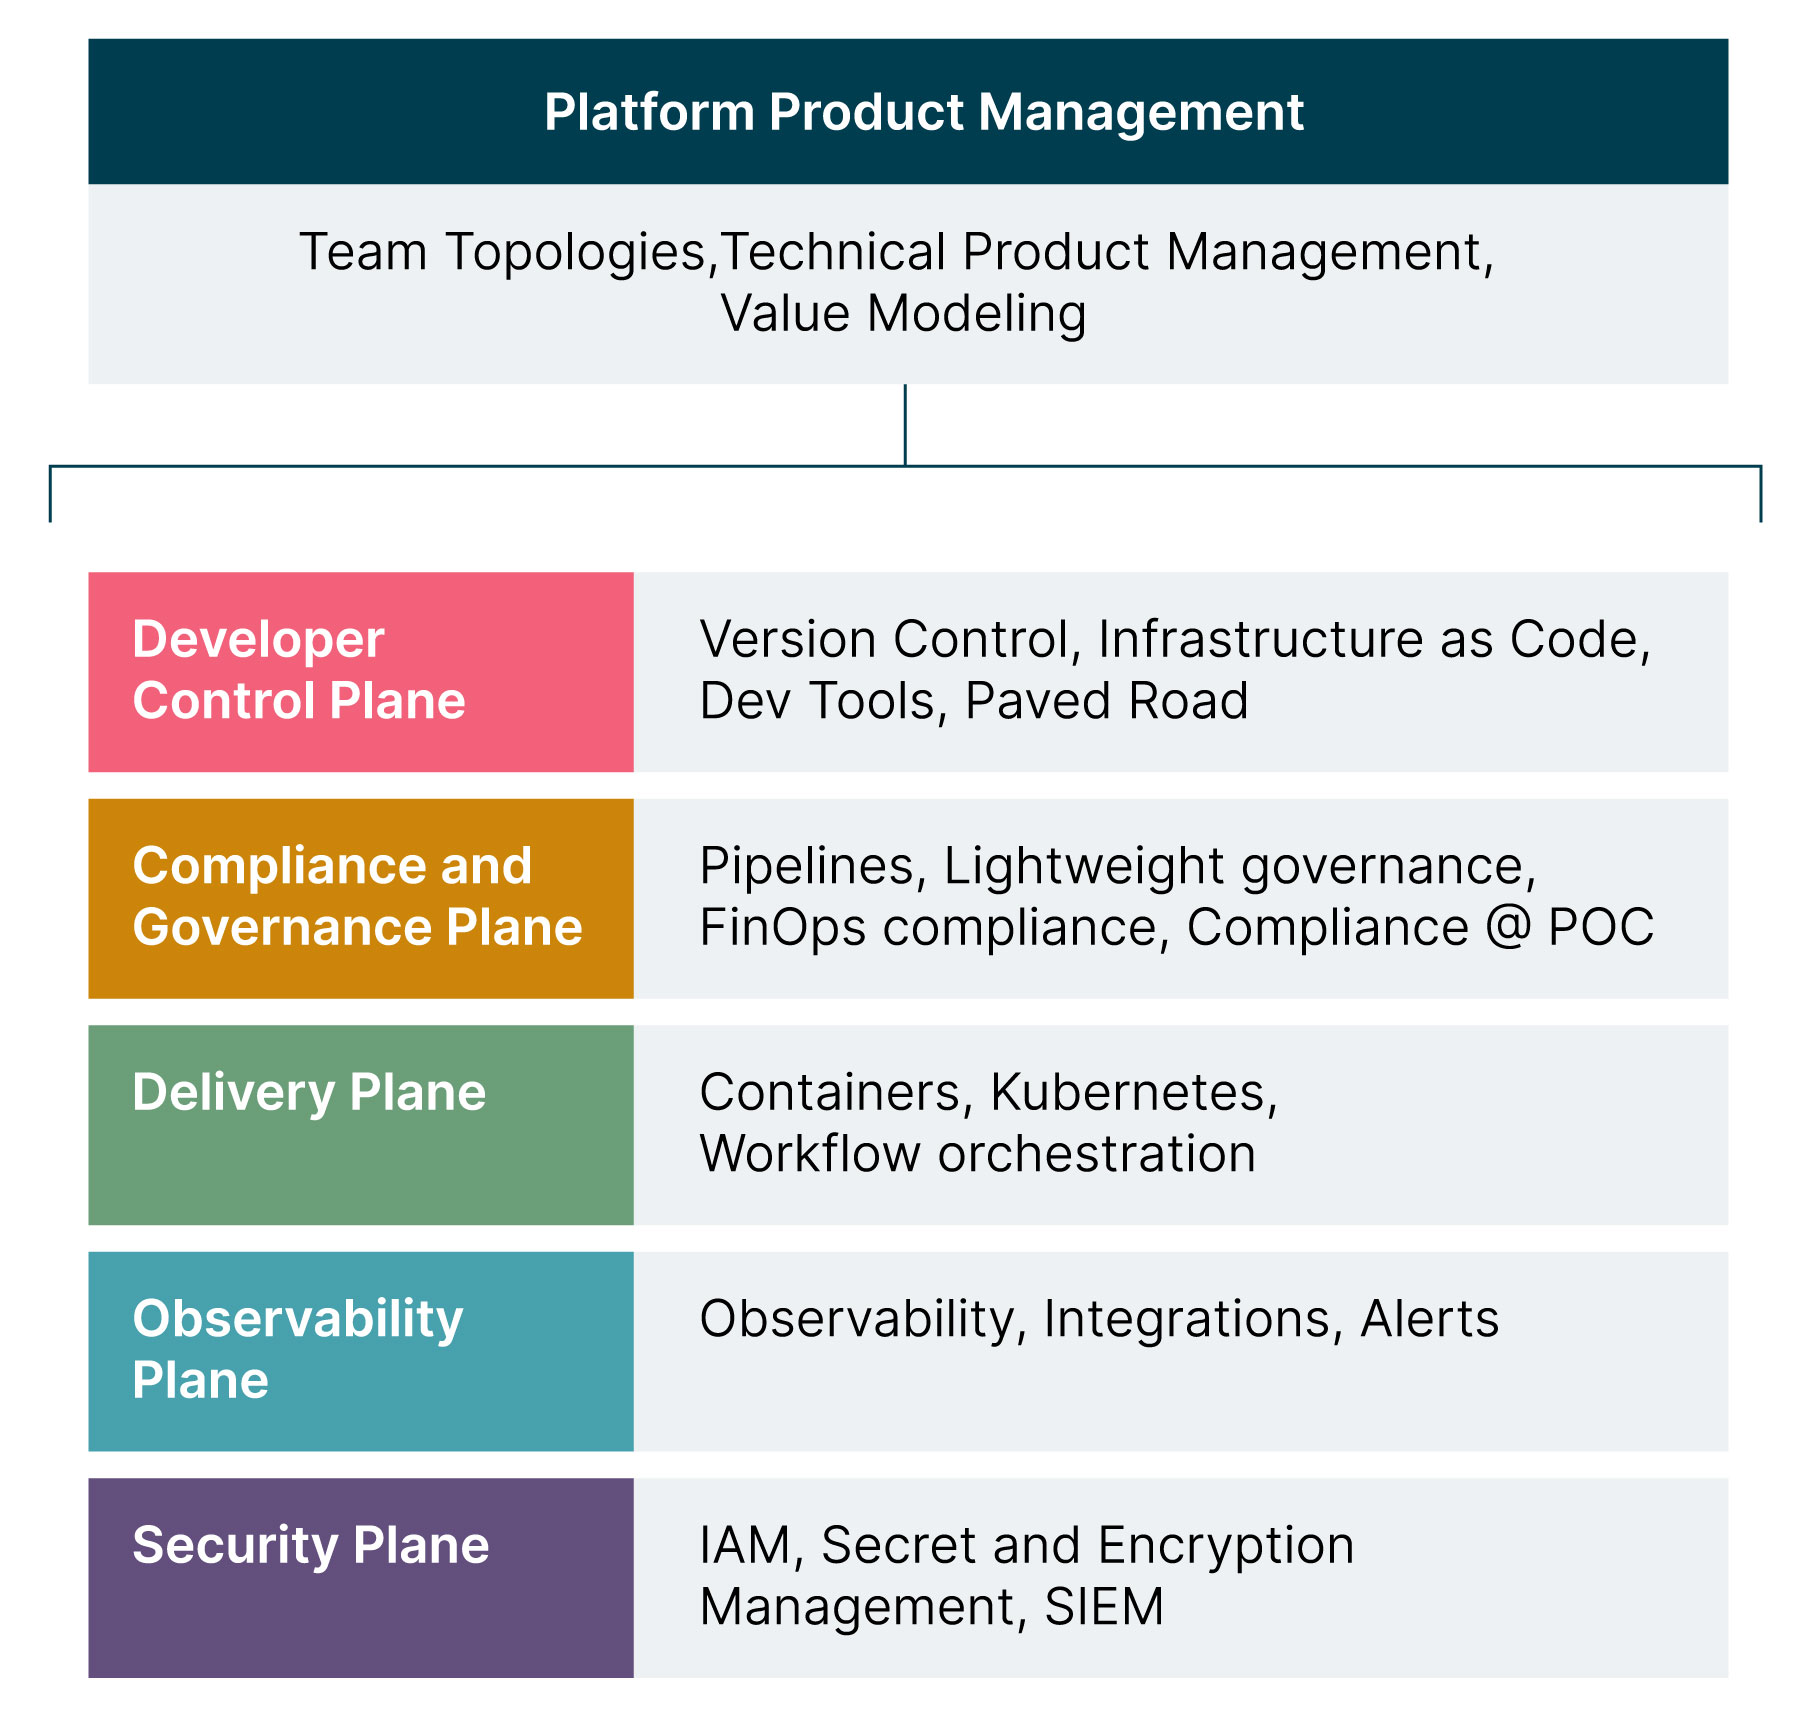 Platform Engineering is comprised of 5 components that are essential for any organization to drive economies of scale